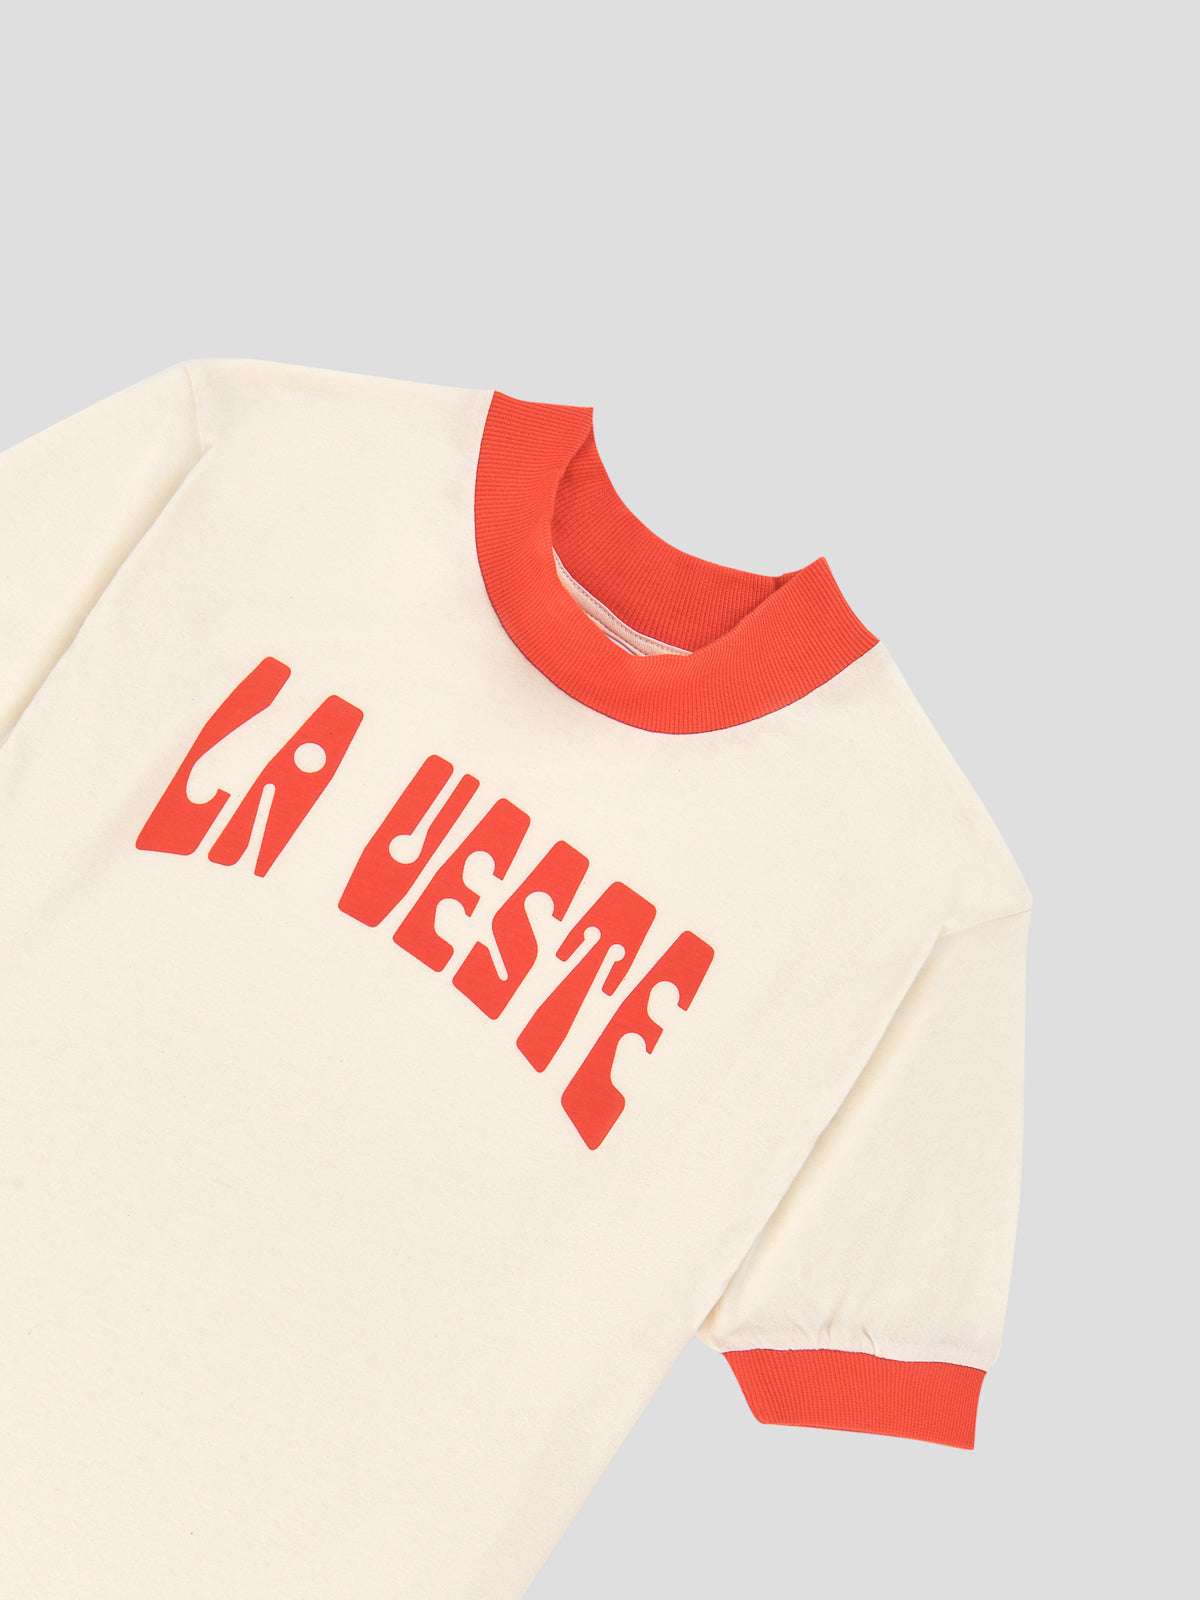 T-shirt in white cotton with LA VESTE logo in red